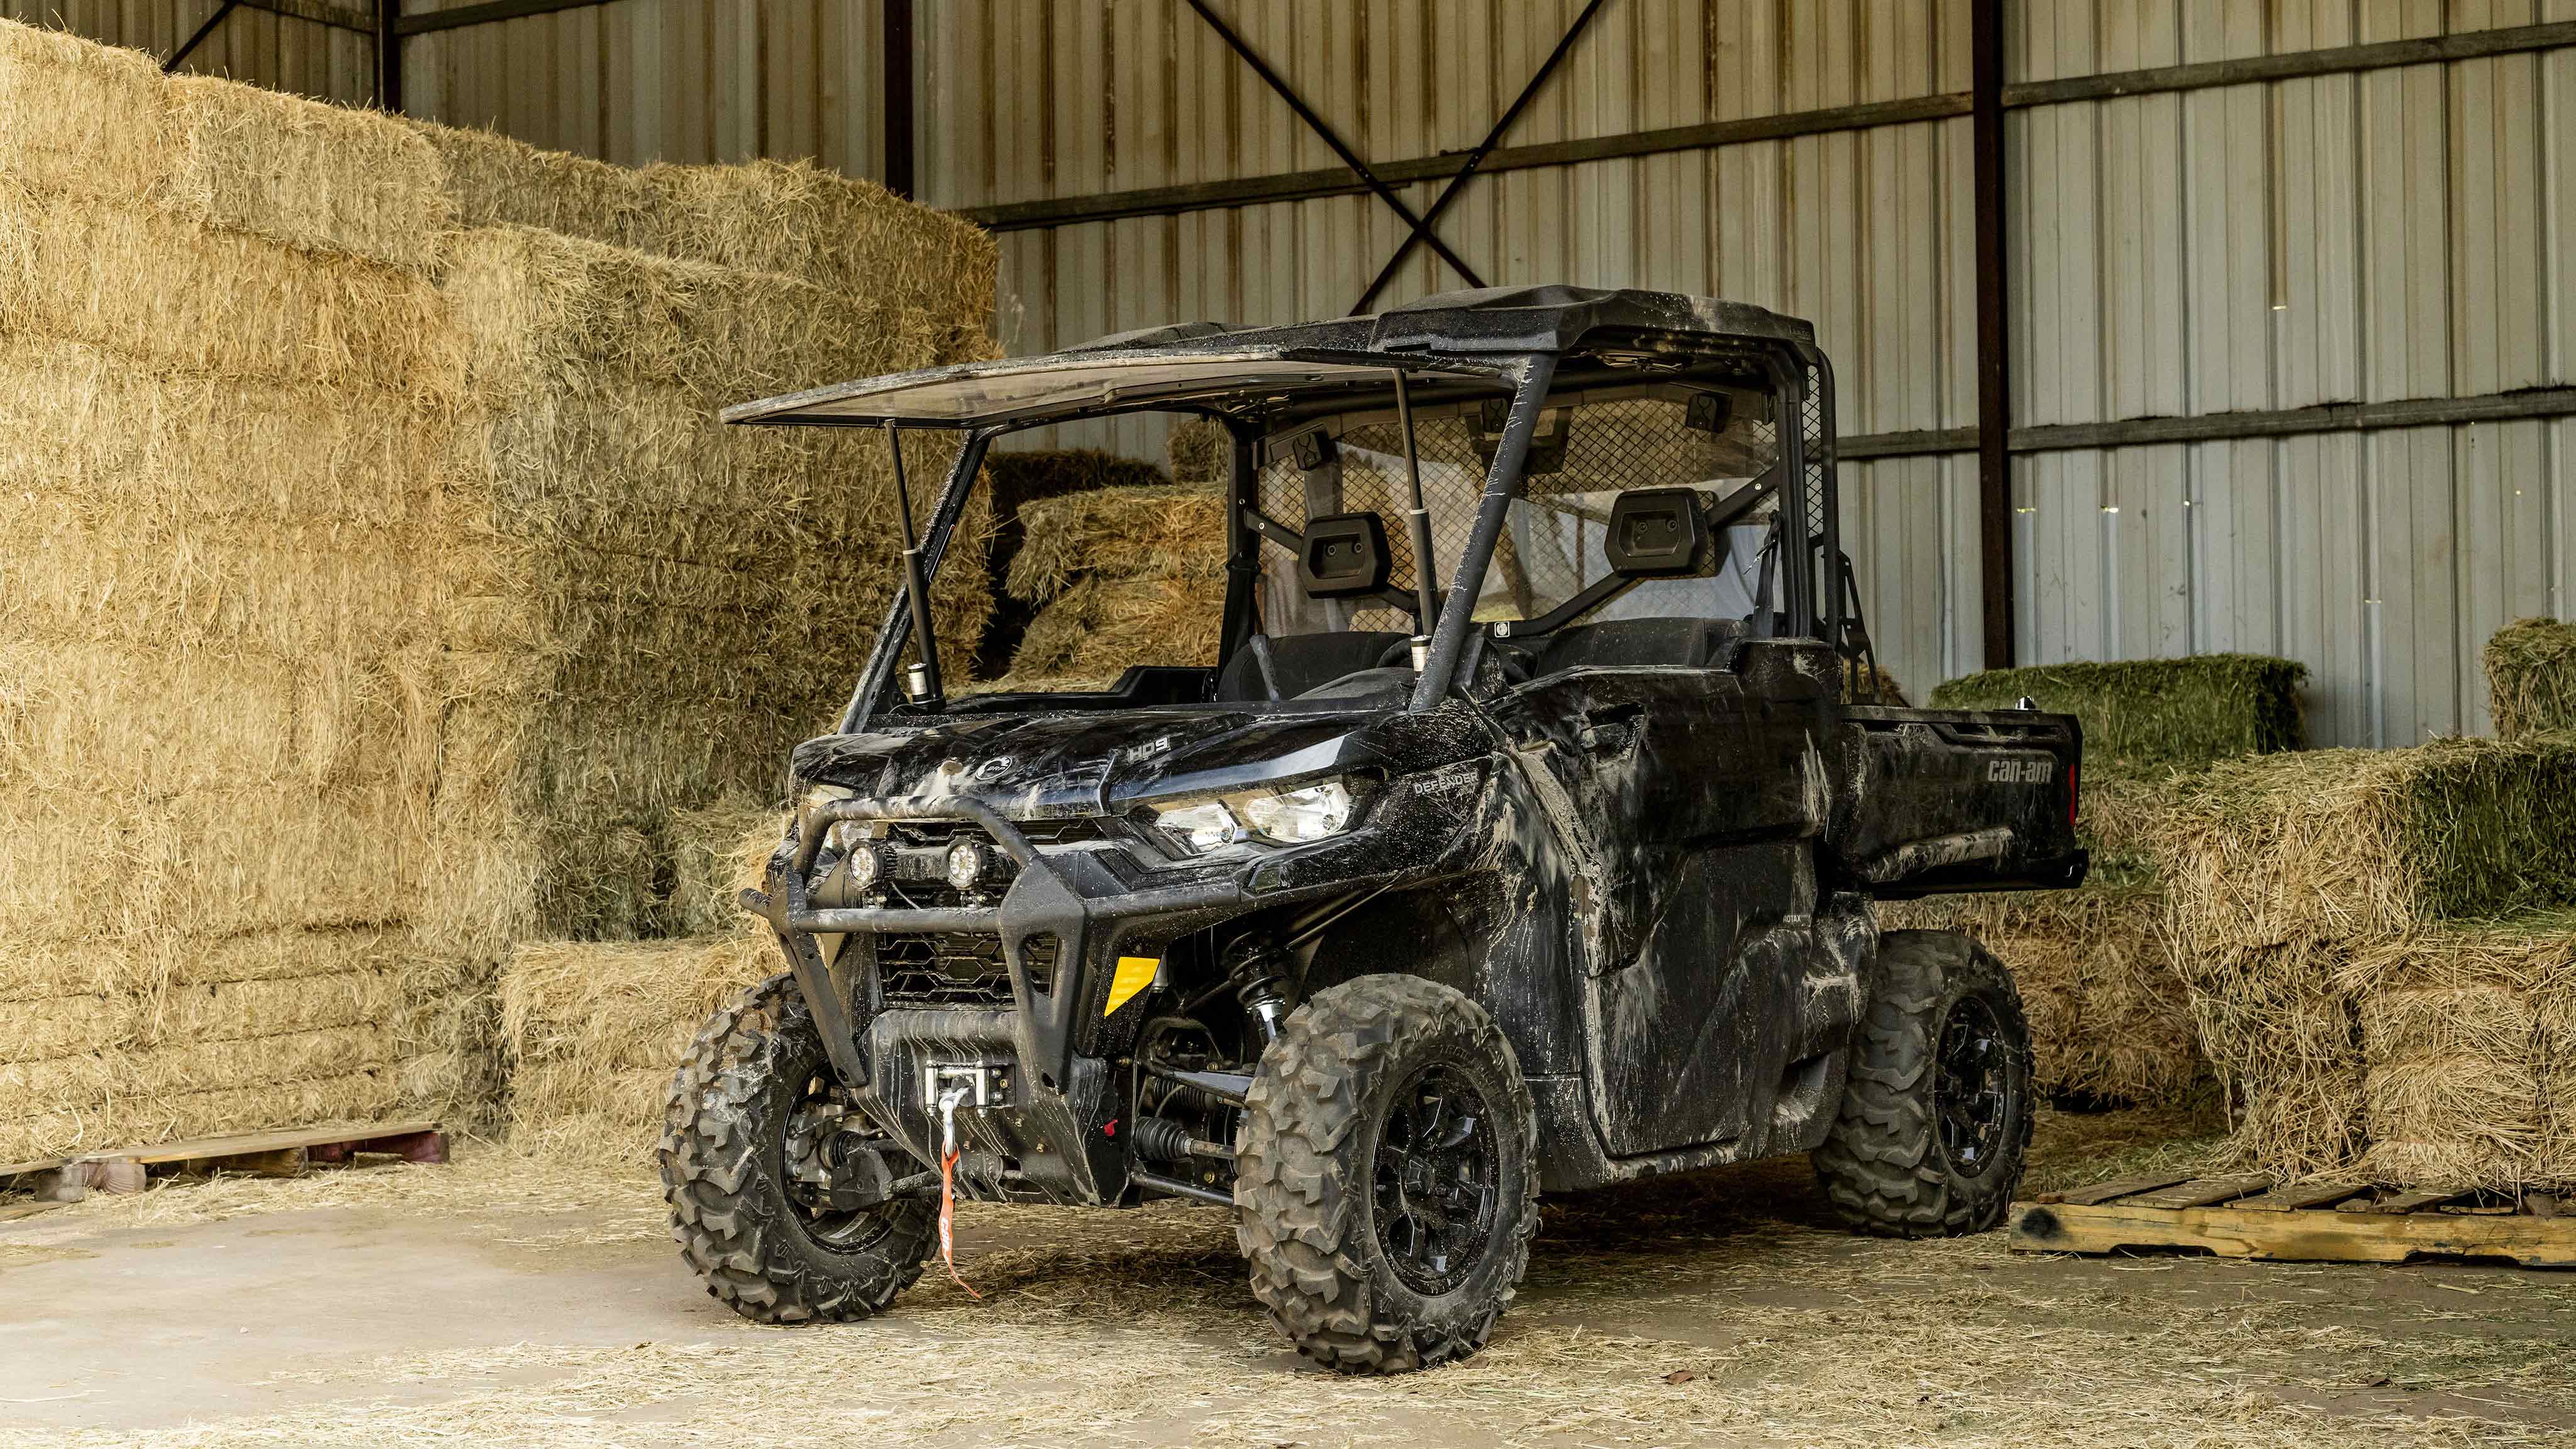 A Can-Am Defender SSV parked in a barn